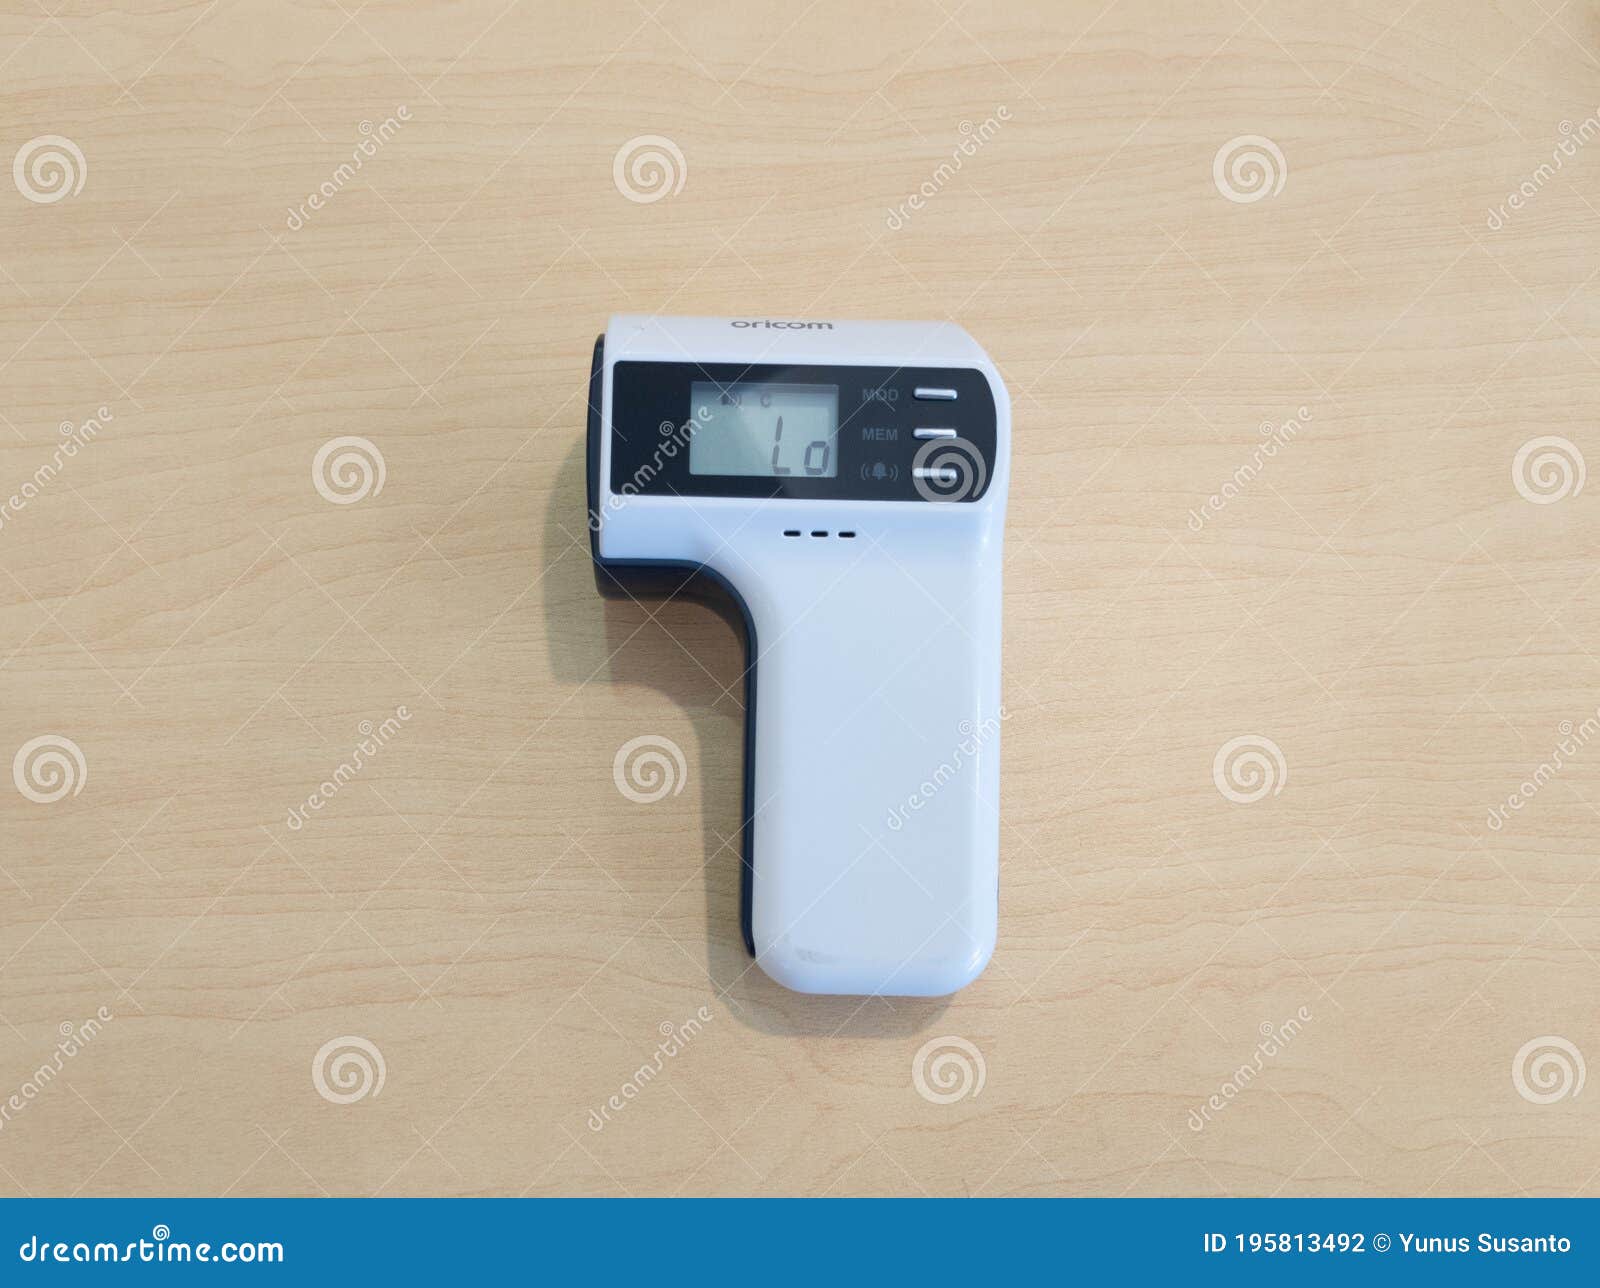 https://thumbs.dreamstime.com/z/bogor-indonesia-september-thermo-gun-to-check-body-temperature-thermo-gun-to-check-body-temperature-195813492.jpg